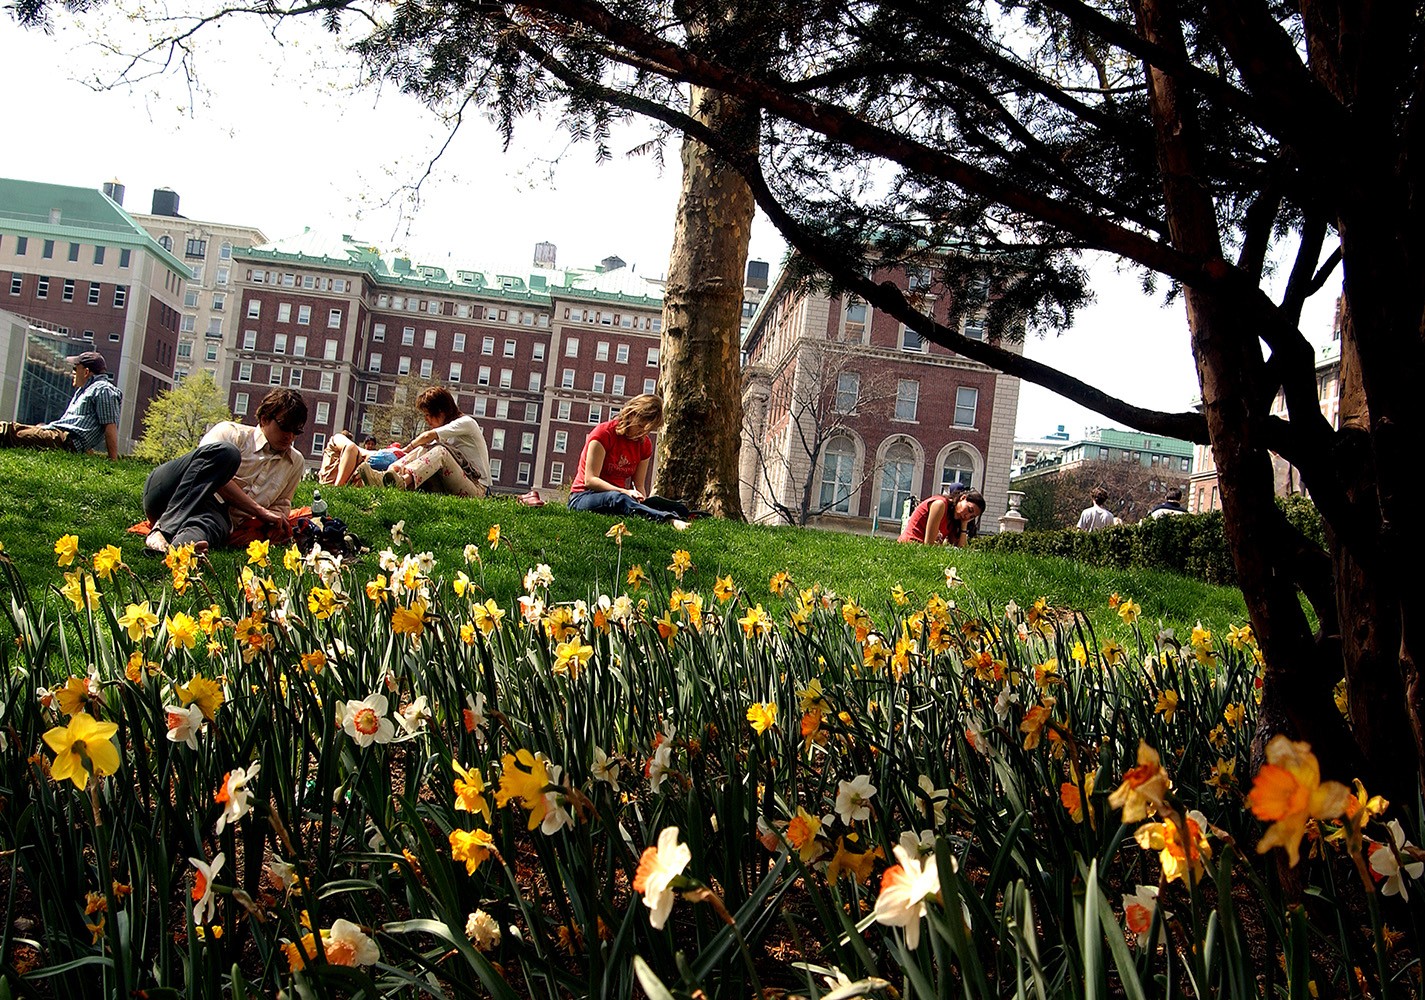 Students sitting on a campus lawn